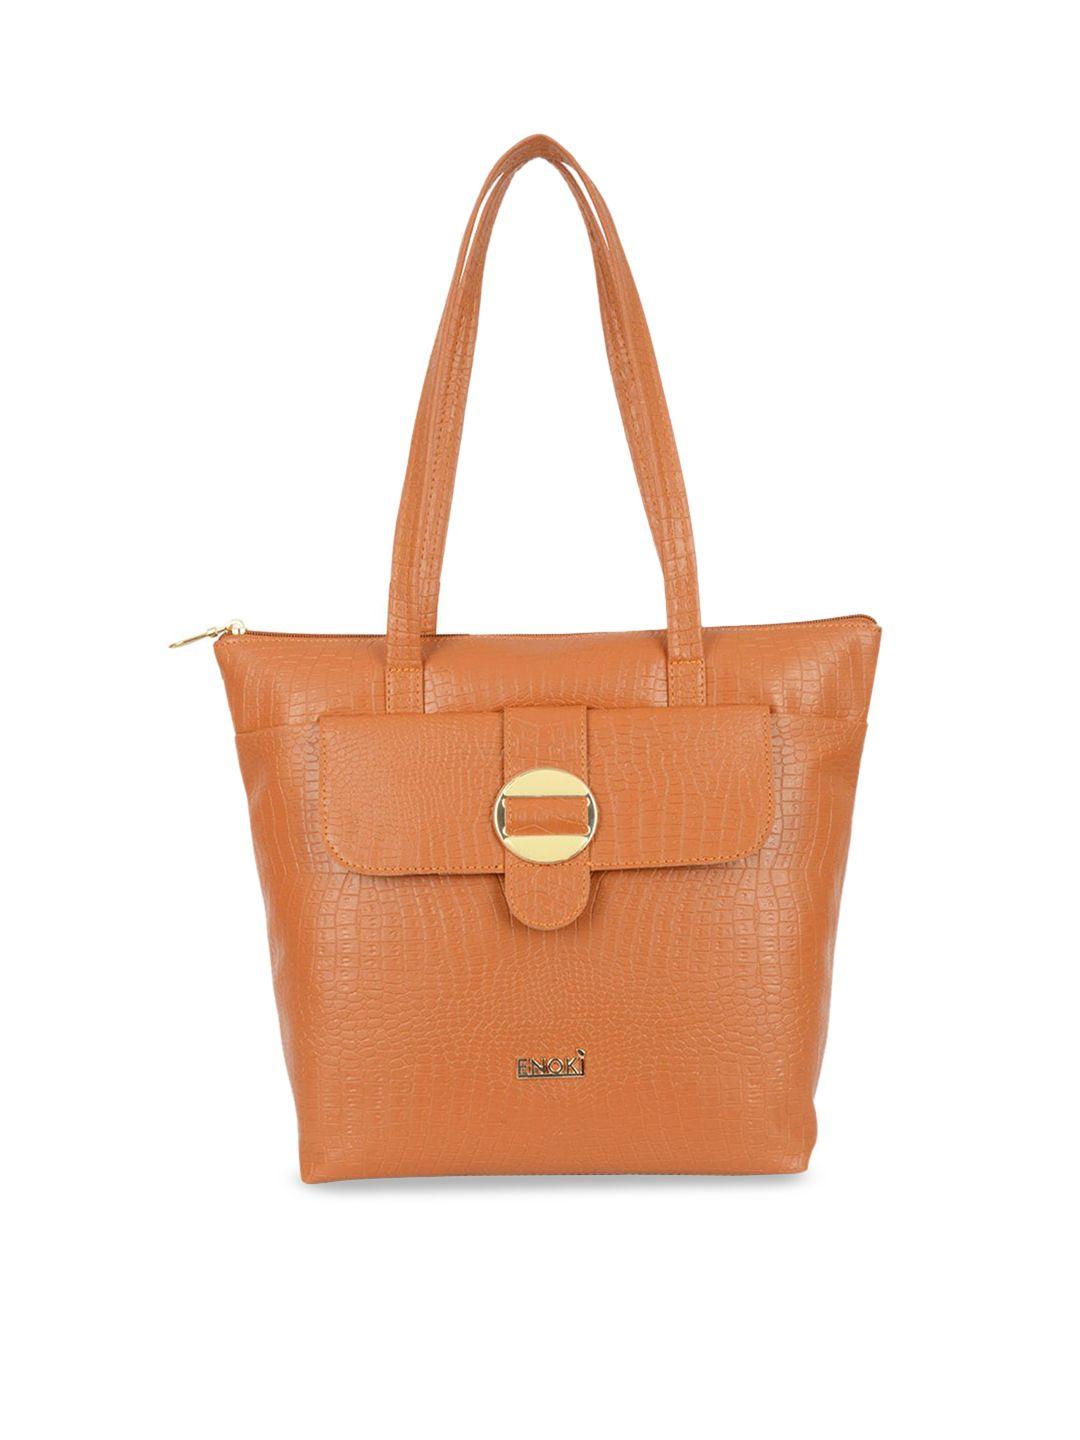 enoki women textured structured tote bag with buckle